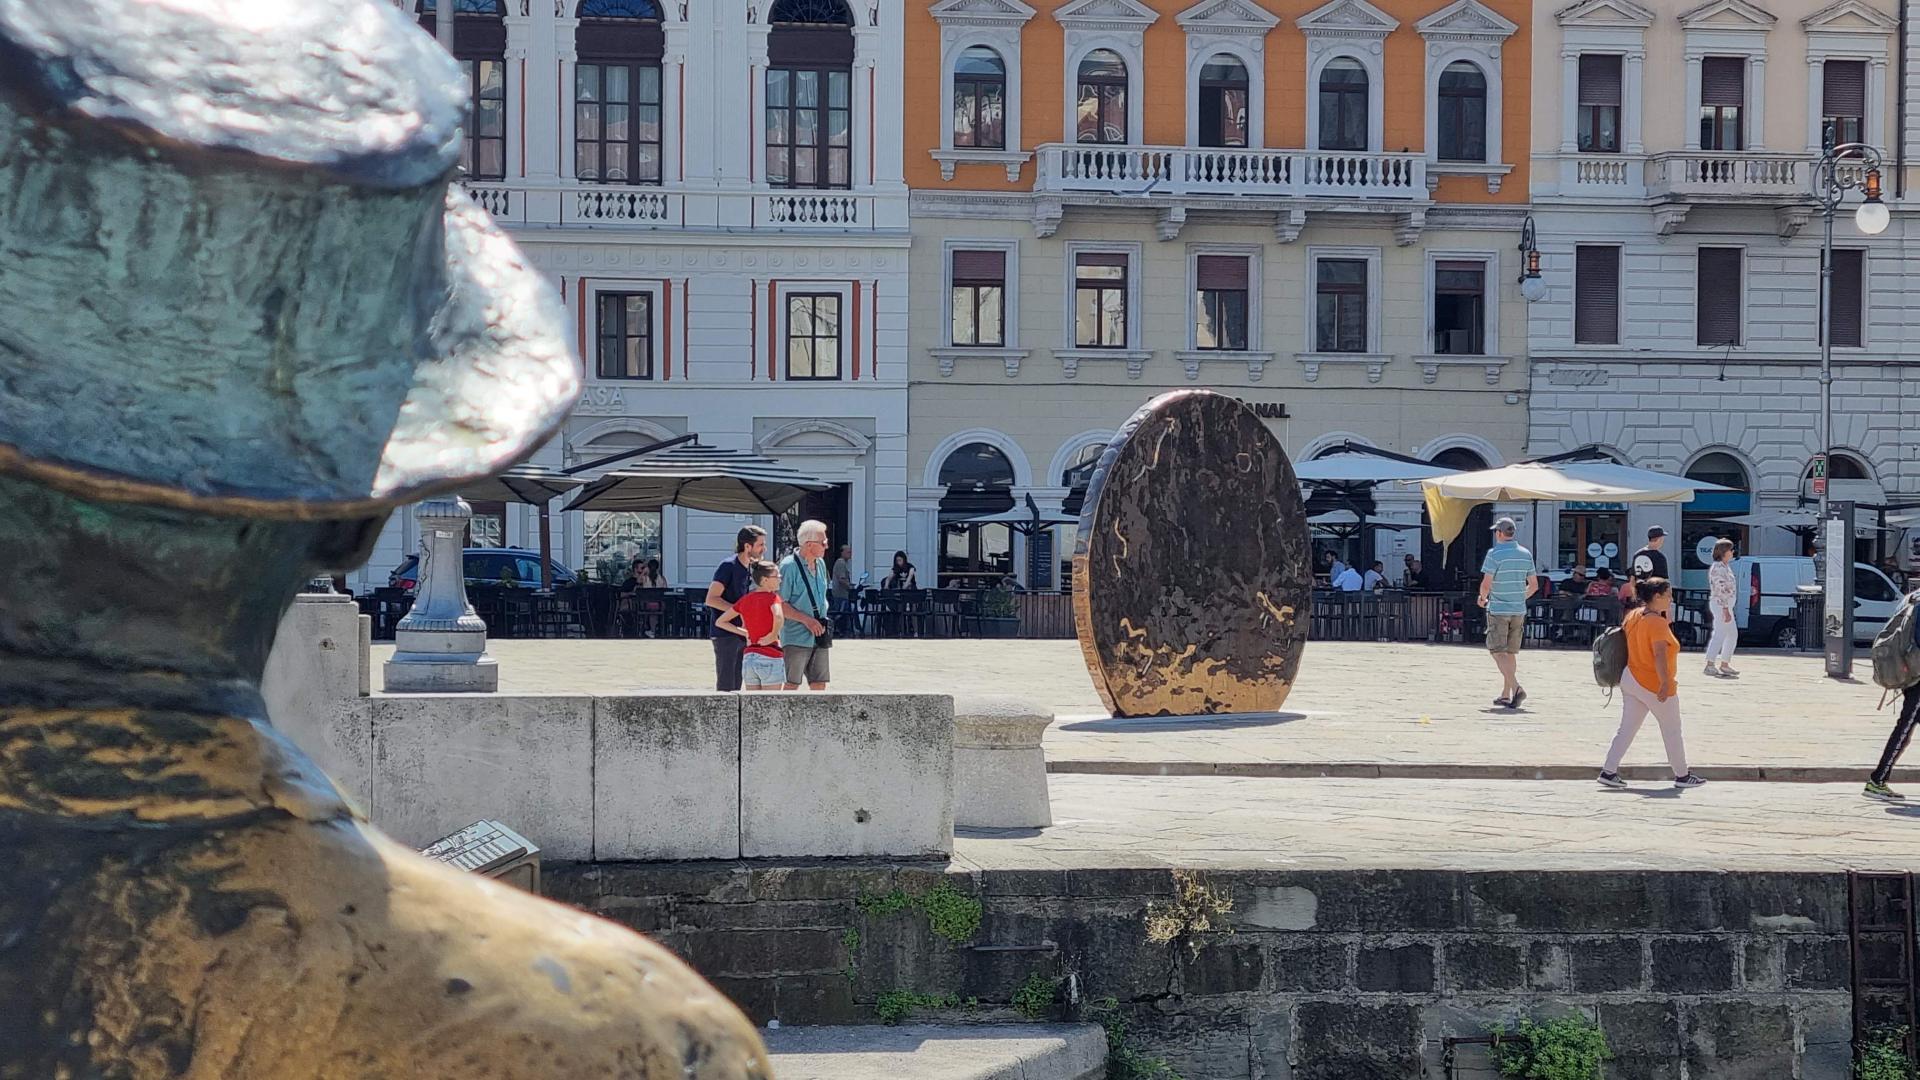 Piazza Ponterosso and the Maria Theresa Thaler Image